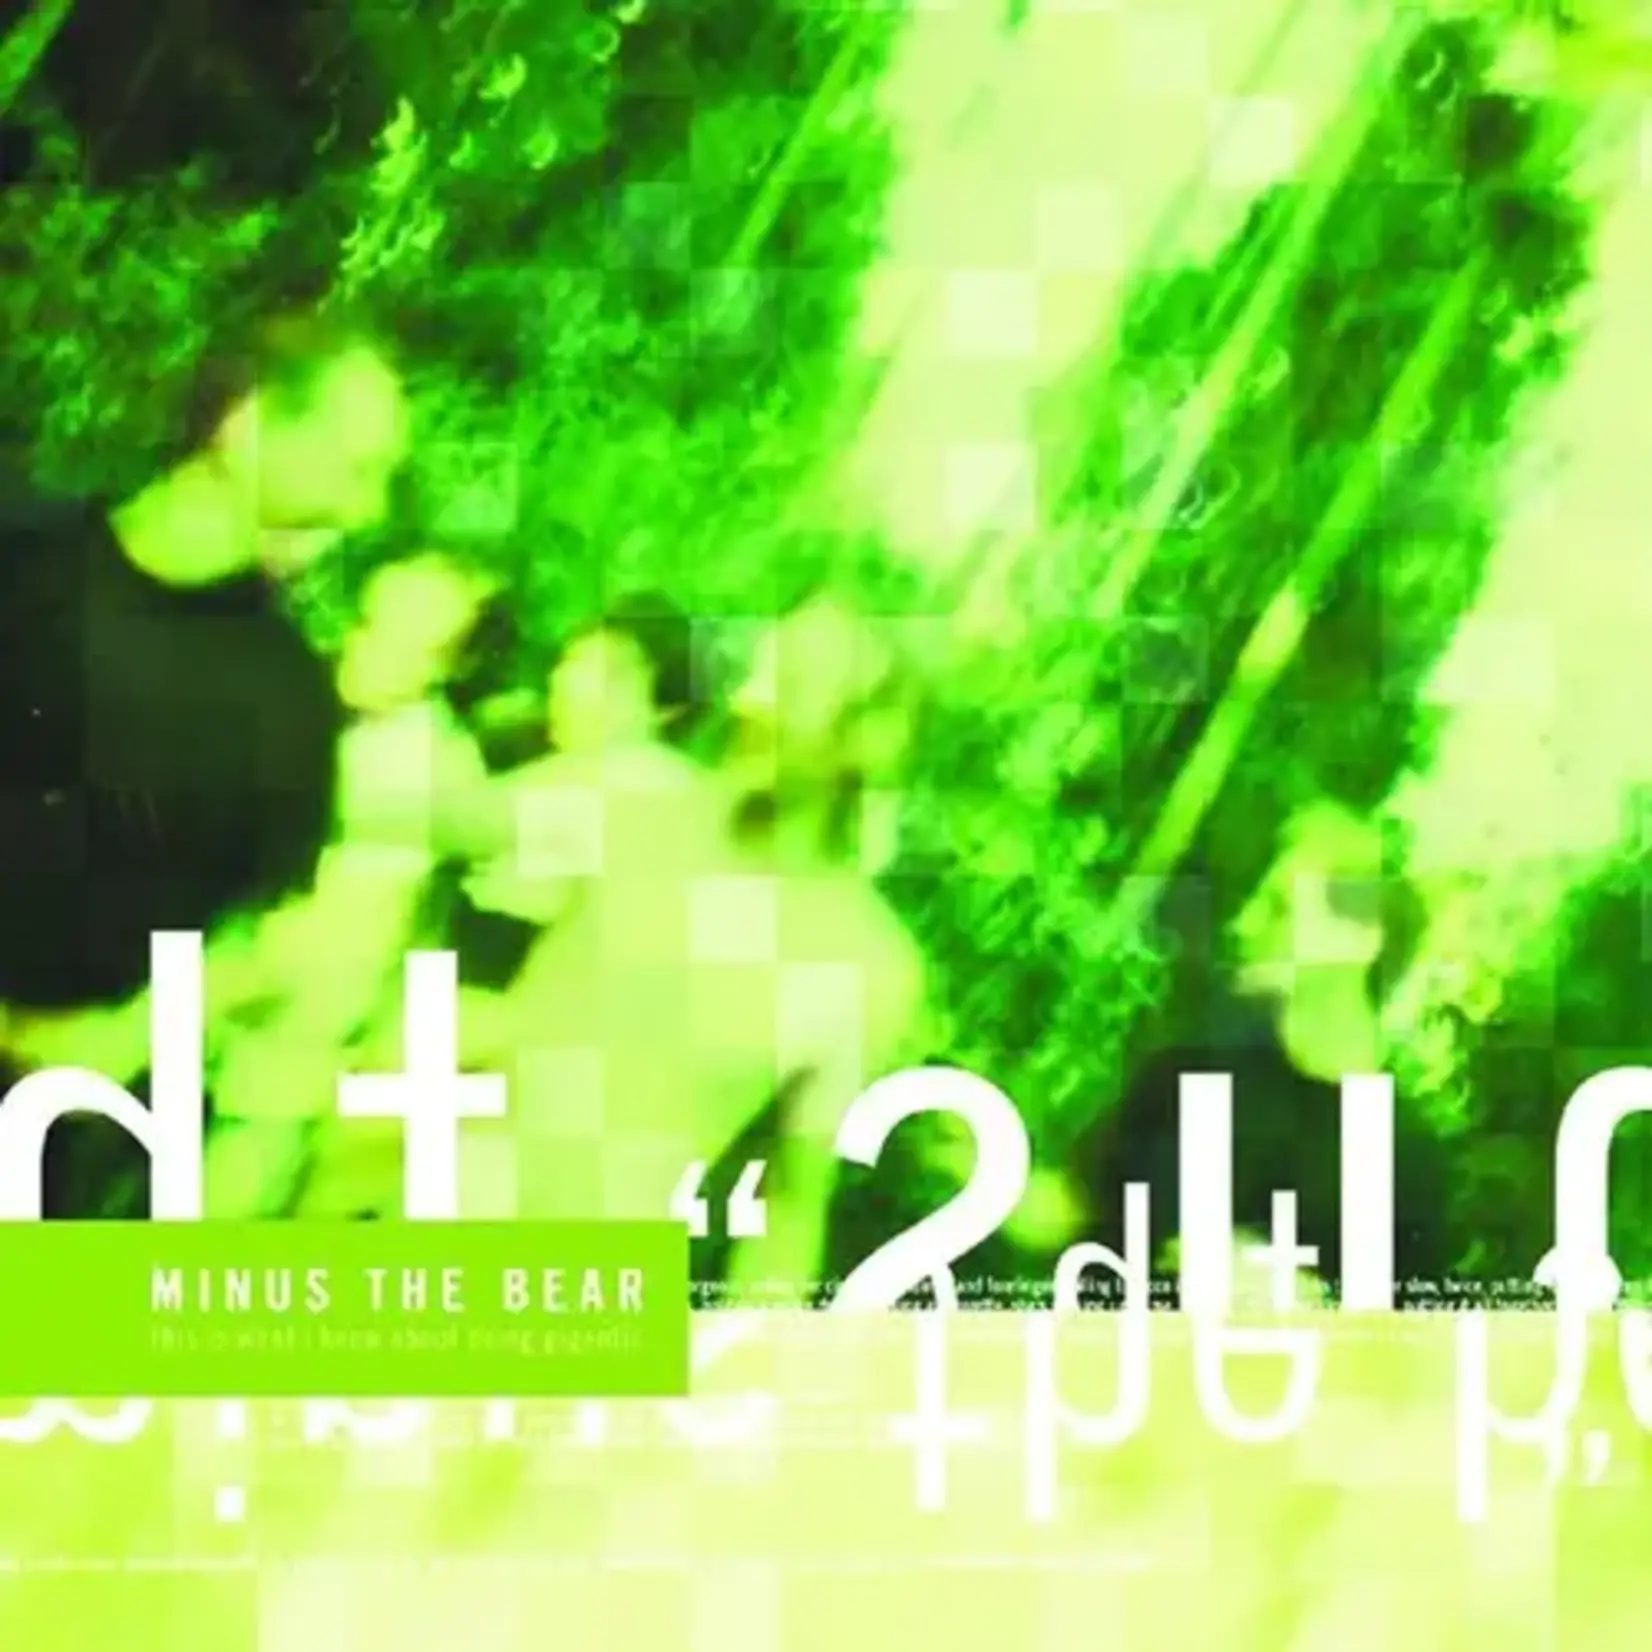 [New] Minus The Bear: This Is What I Know About Being Gigantic (coke bottle clear vinyl) [SUICIDE SQUEEZE]